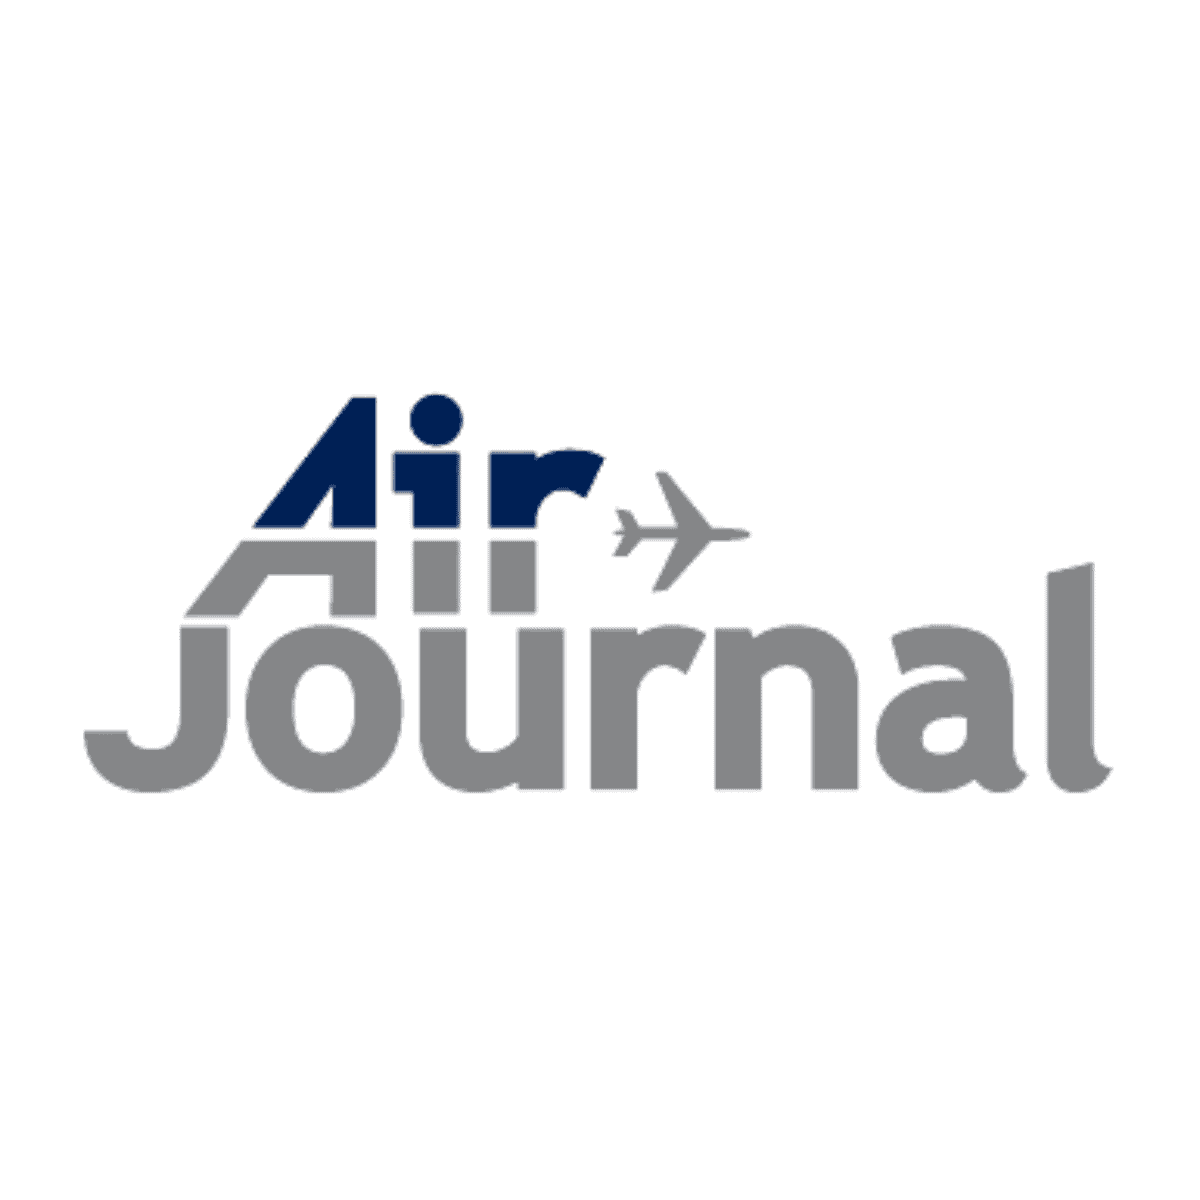 Aircraft patch paint repair fast planes, Air Journal writes about CorsoPatch Aircraft